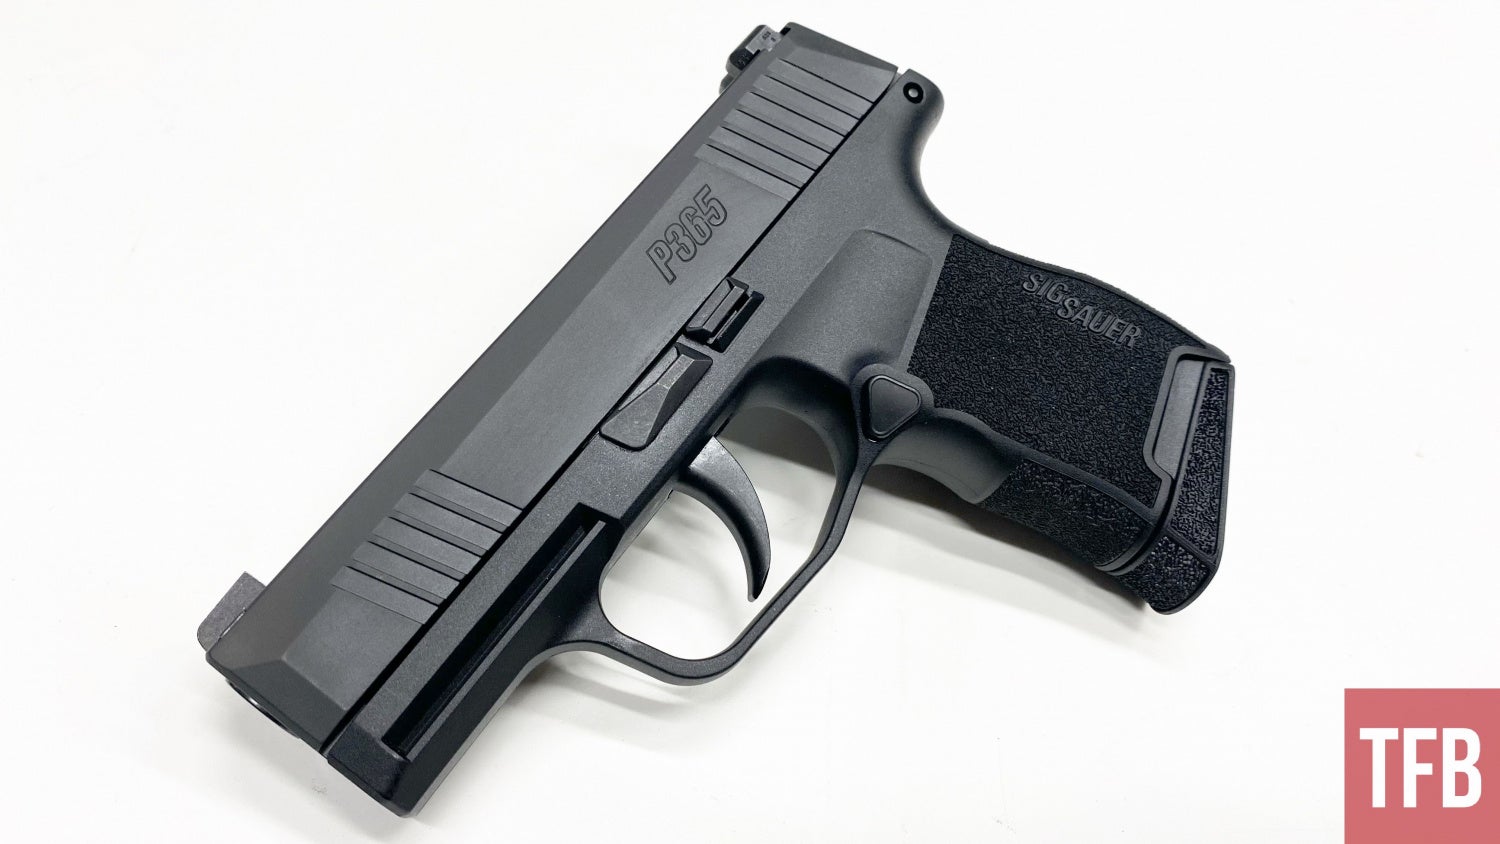 Concealed Carry Corner: How Much Is Too Much For Summer Carry?